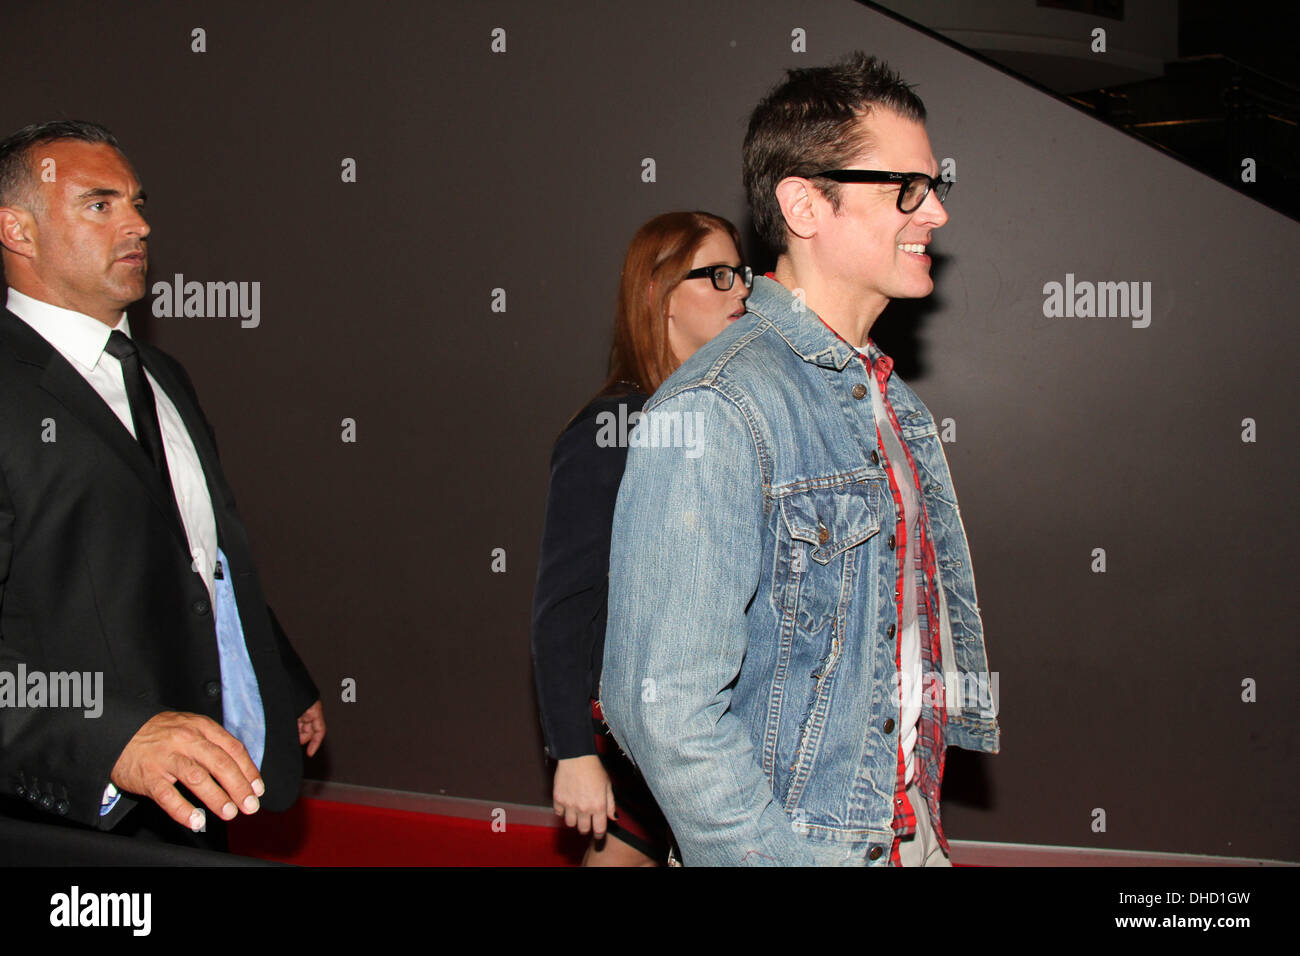 Event Cinemas, George Street, Sydney, Australia. Johnny Knoxville ‘Irving Zisman’ and Producer Derek Freda attended the red carpet special screening of Jackass Presents: Bad Grandpa. Pictured is Johnny Knoxville. Copyright Credit:  2013 Richard Milnes/Alamy Live News. Stock Photo